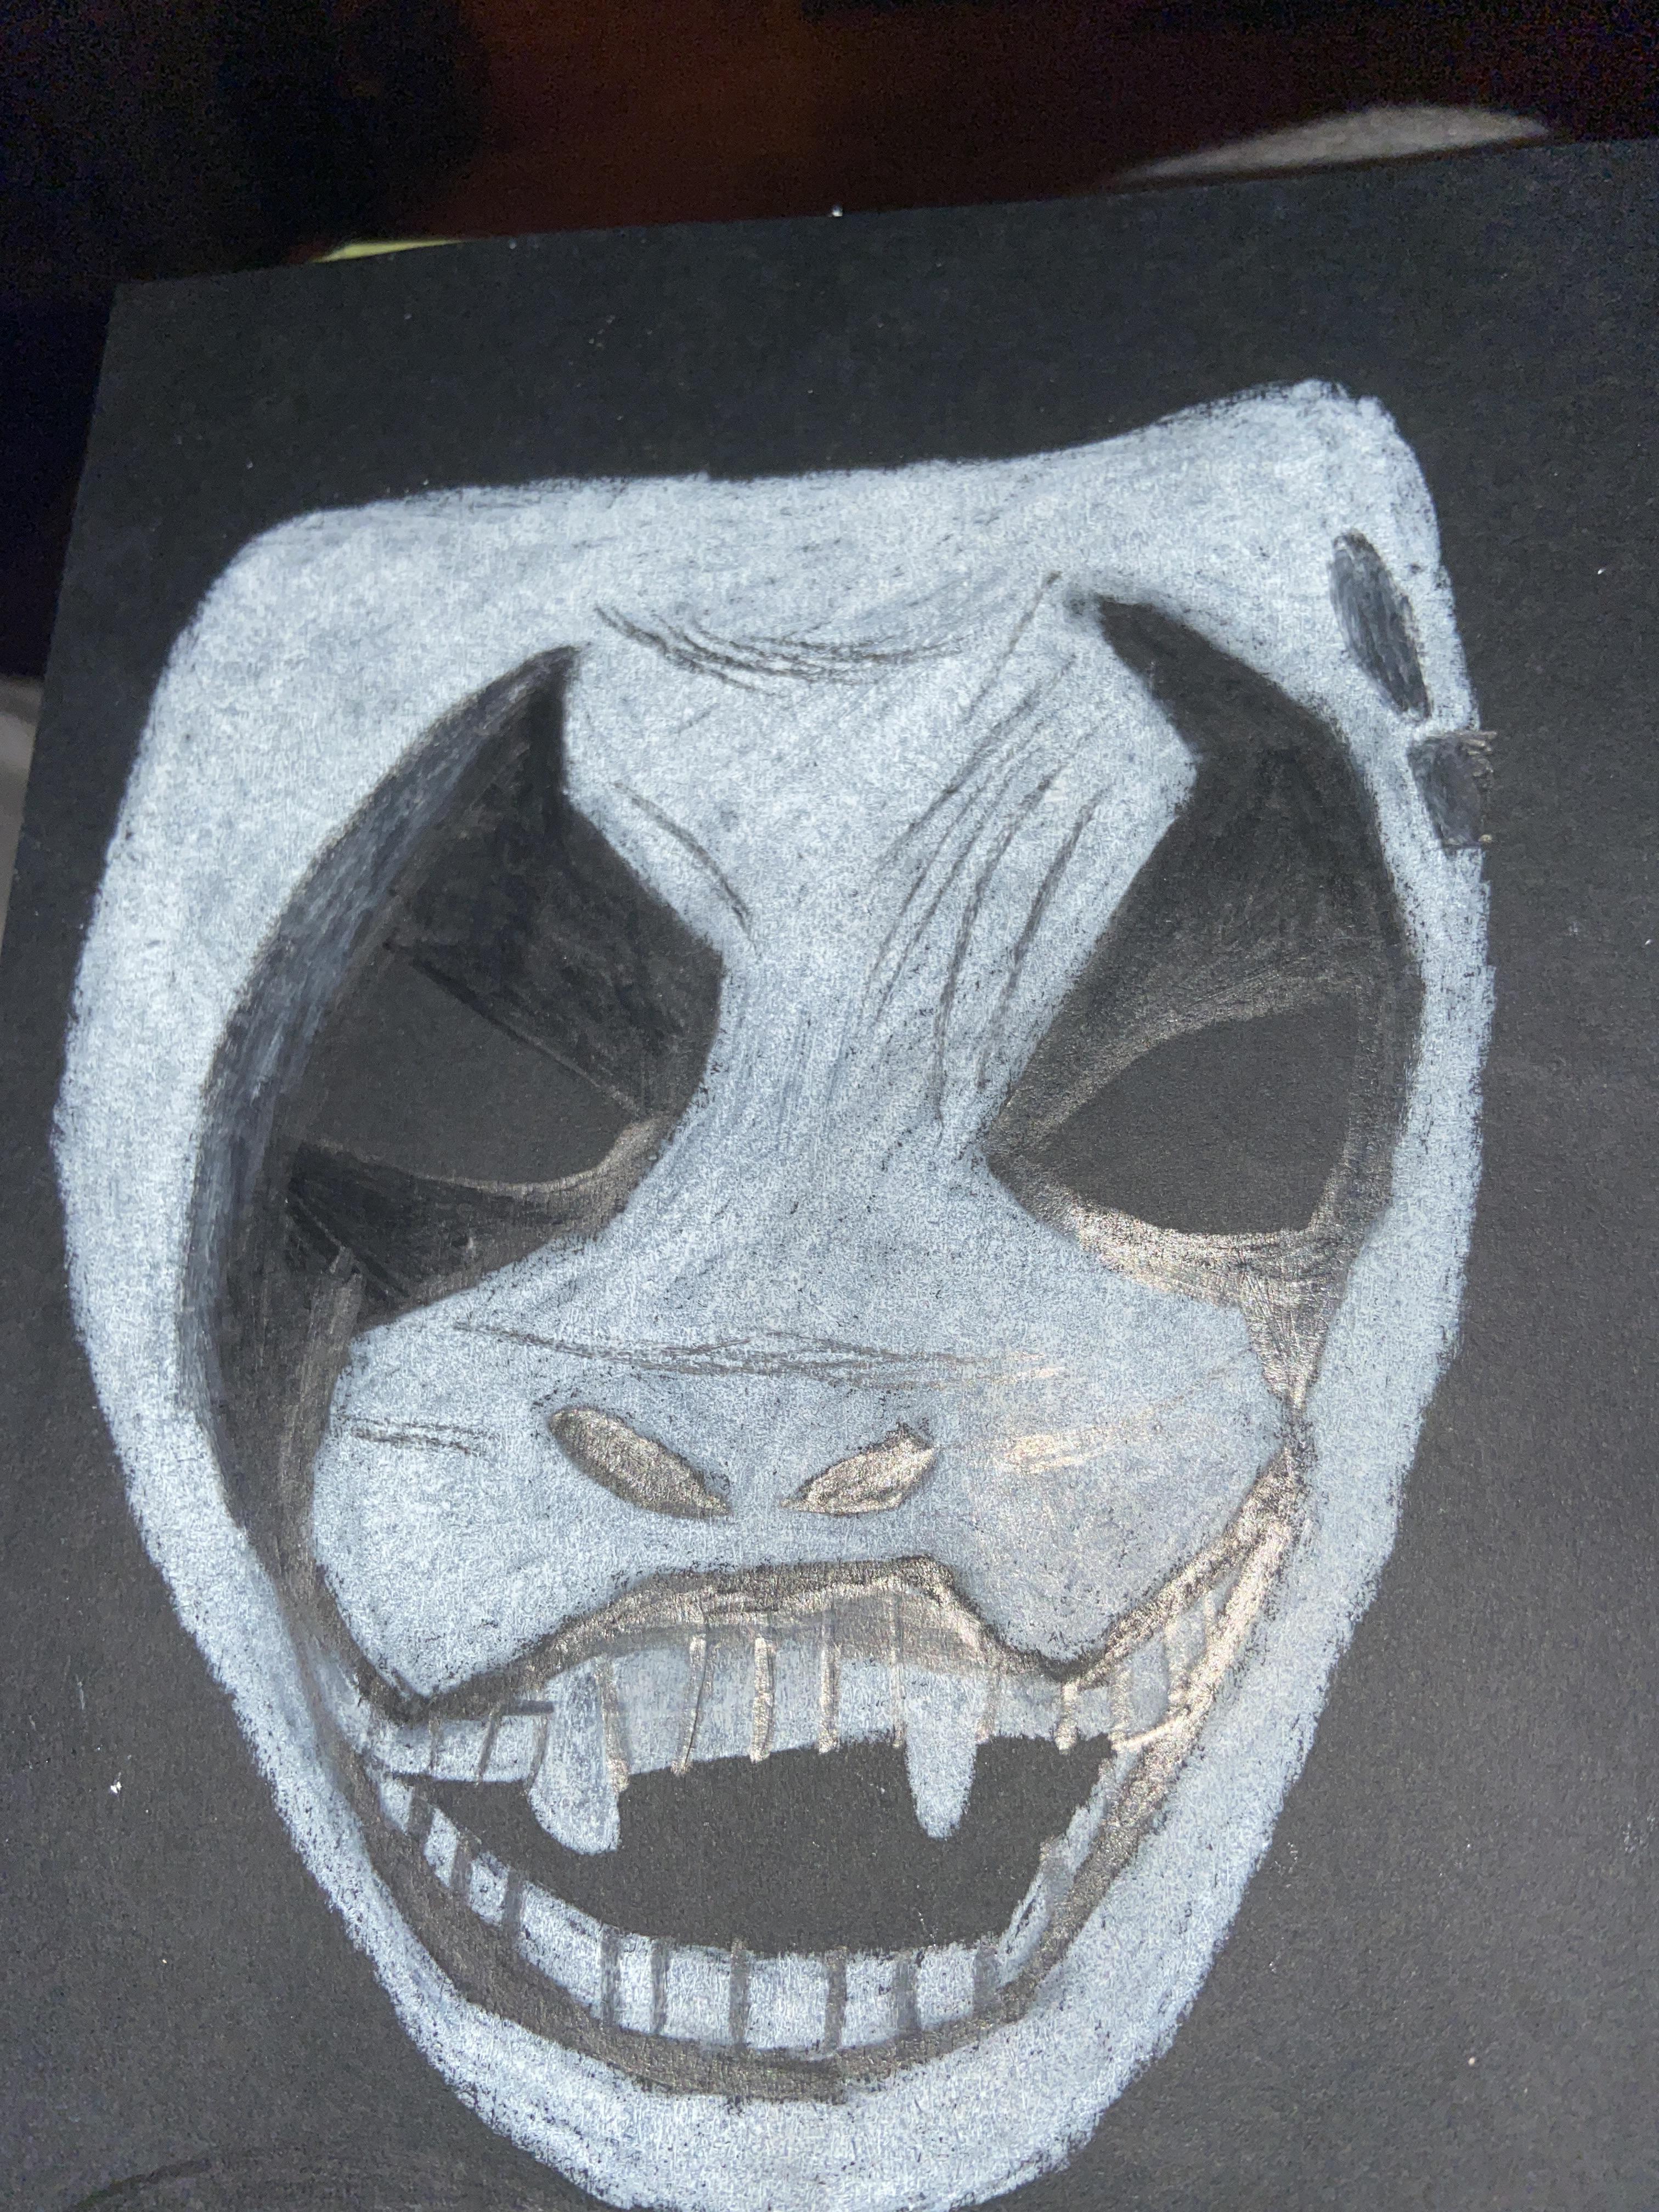 Drawing I made of the Fiend Bray Wyatt’s mask. Scrolller